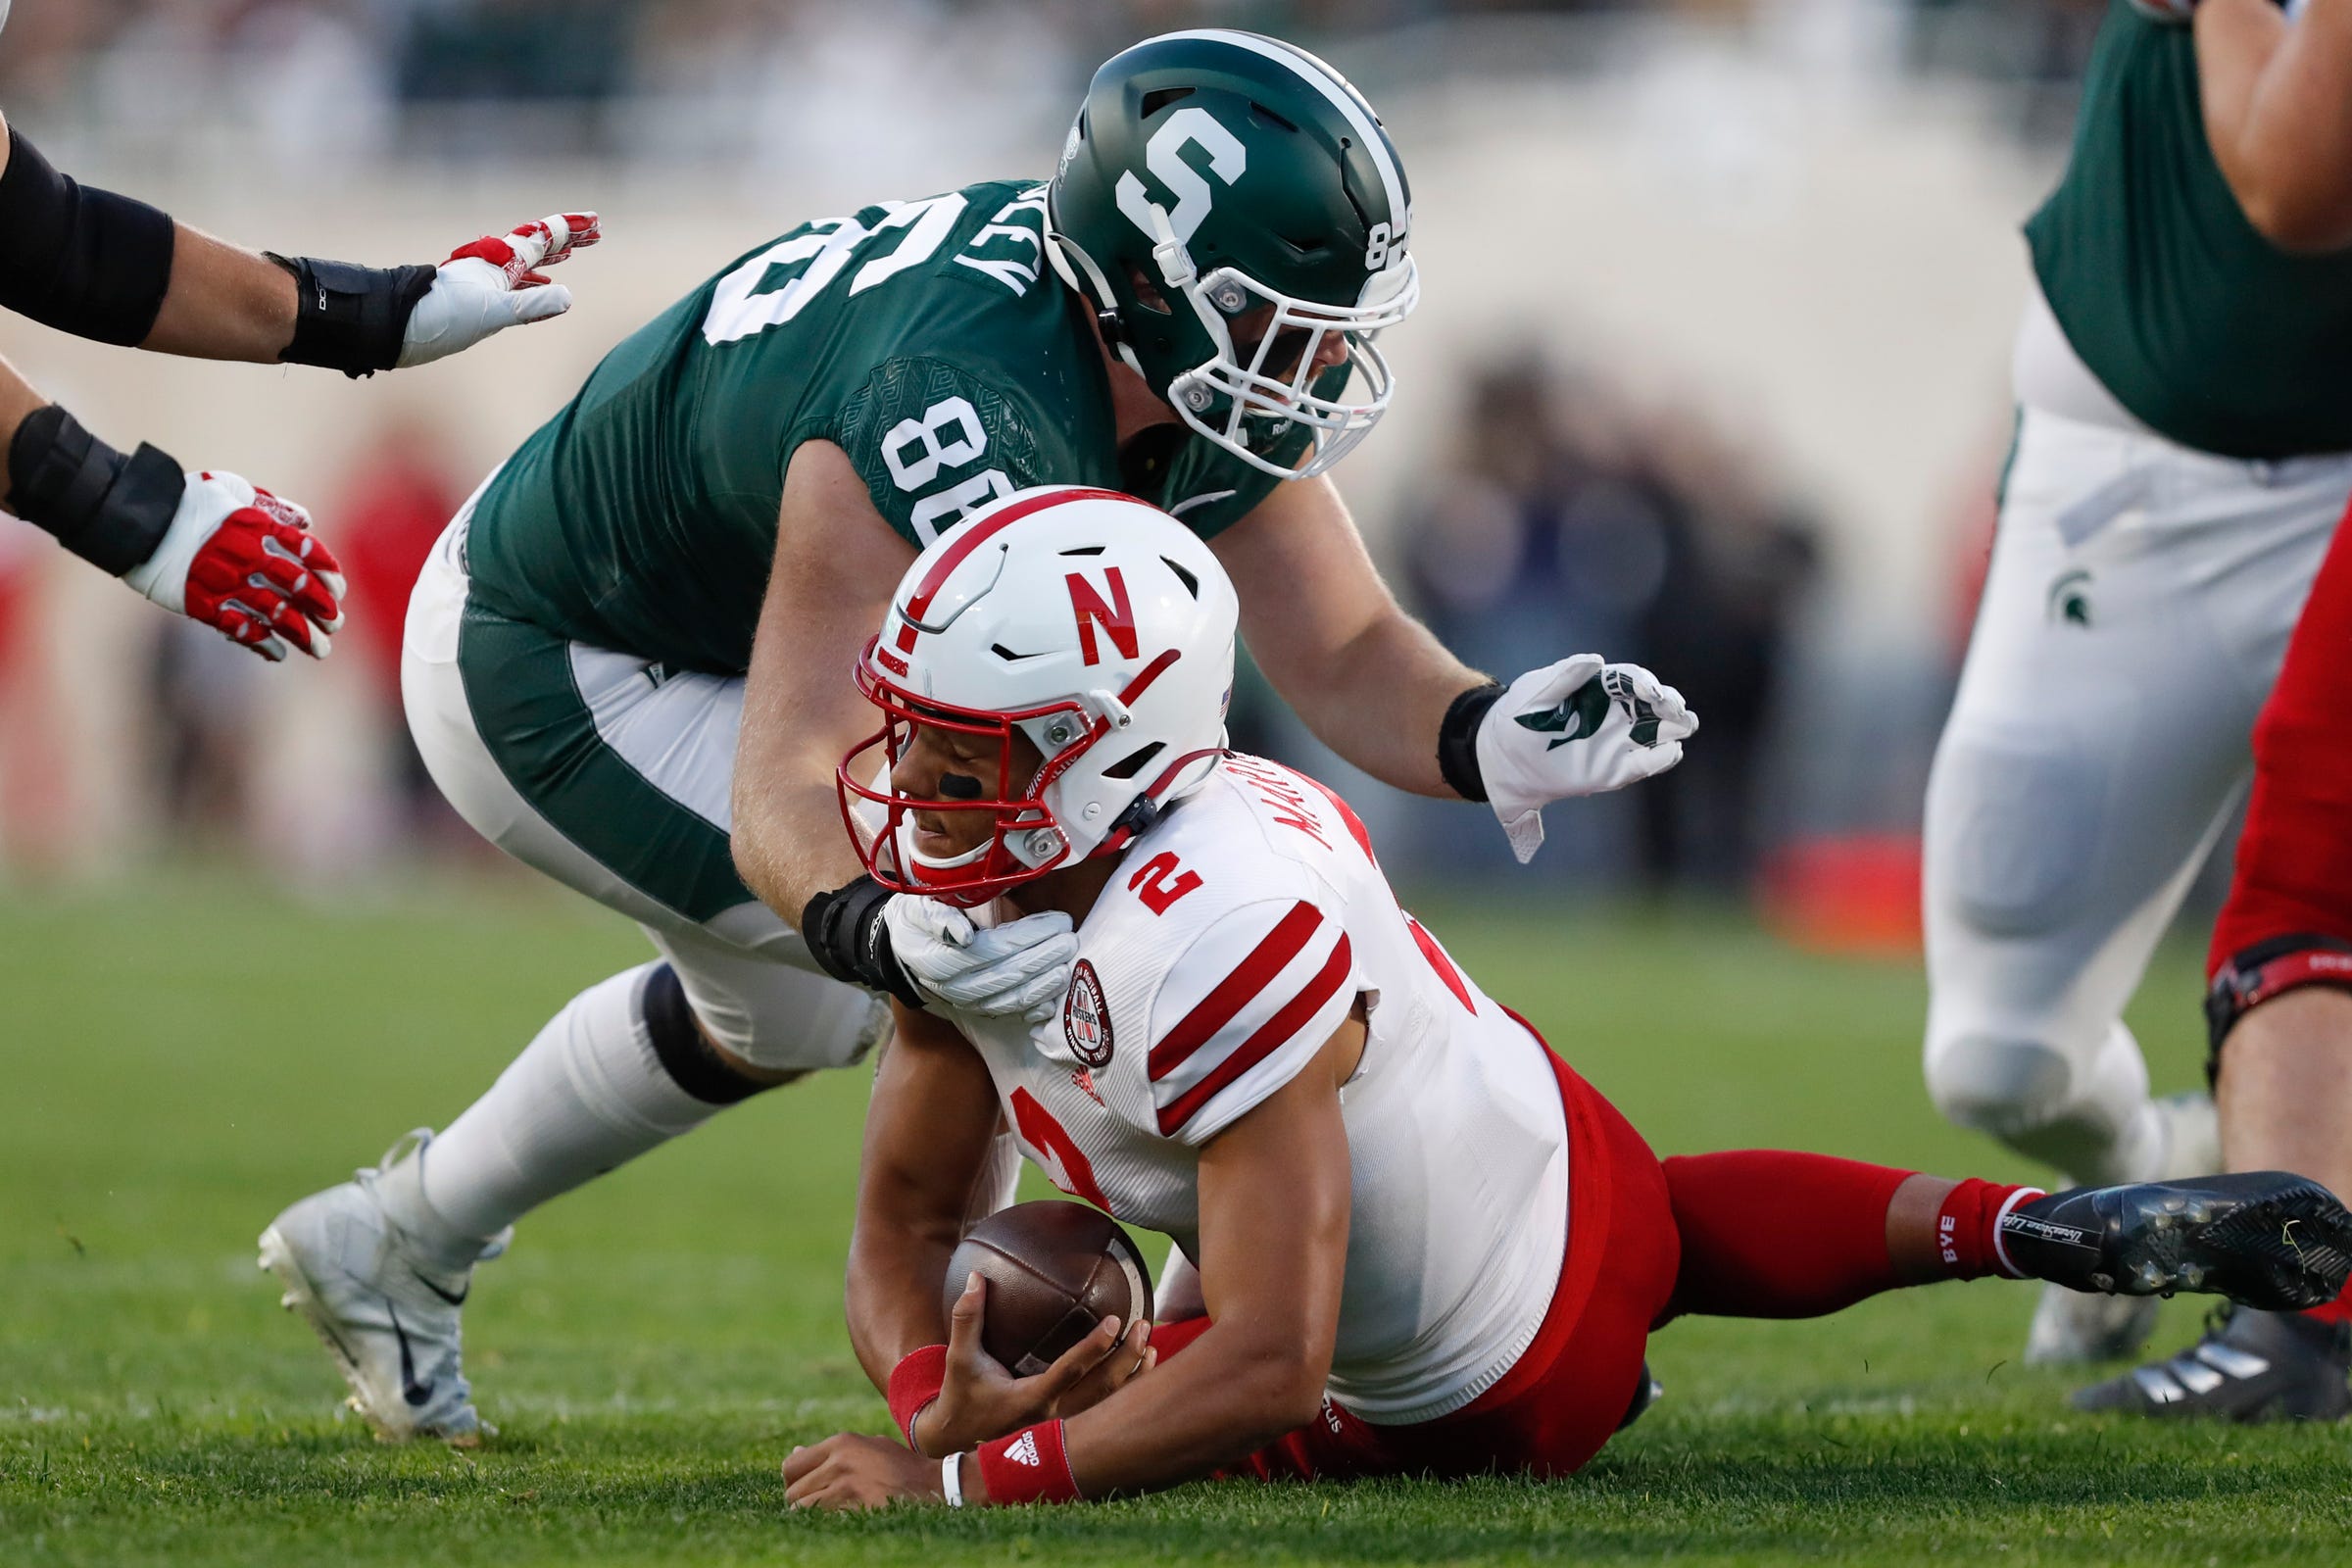 Nebraska quarterback Adrian Martinez goes down in front of Michigan State defensive end Drew Beesley during the first quarter on Saturday, Sept. 25, 2021, in East Lansing.